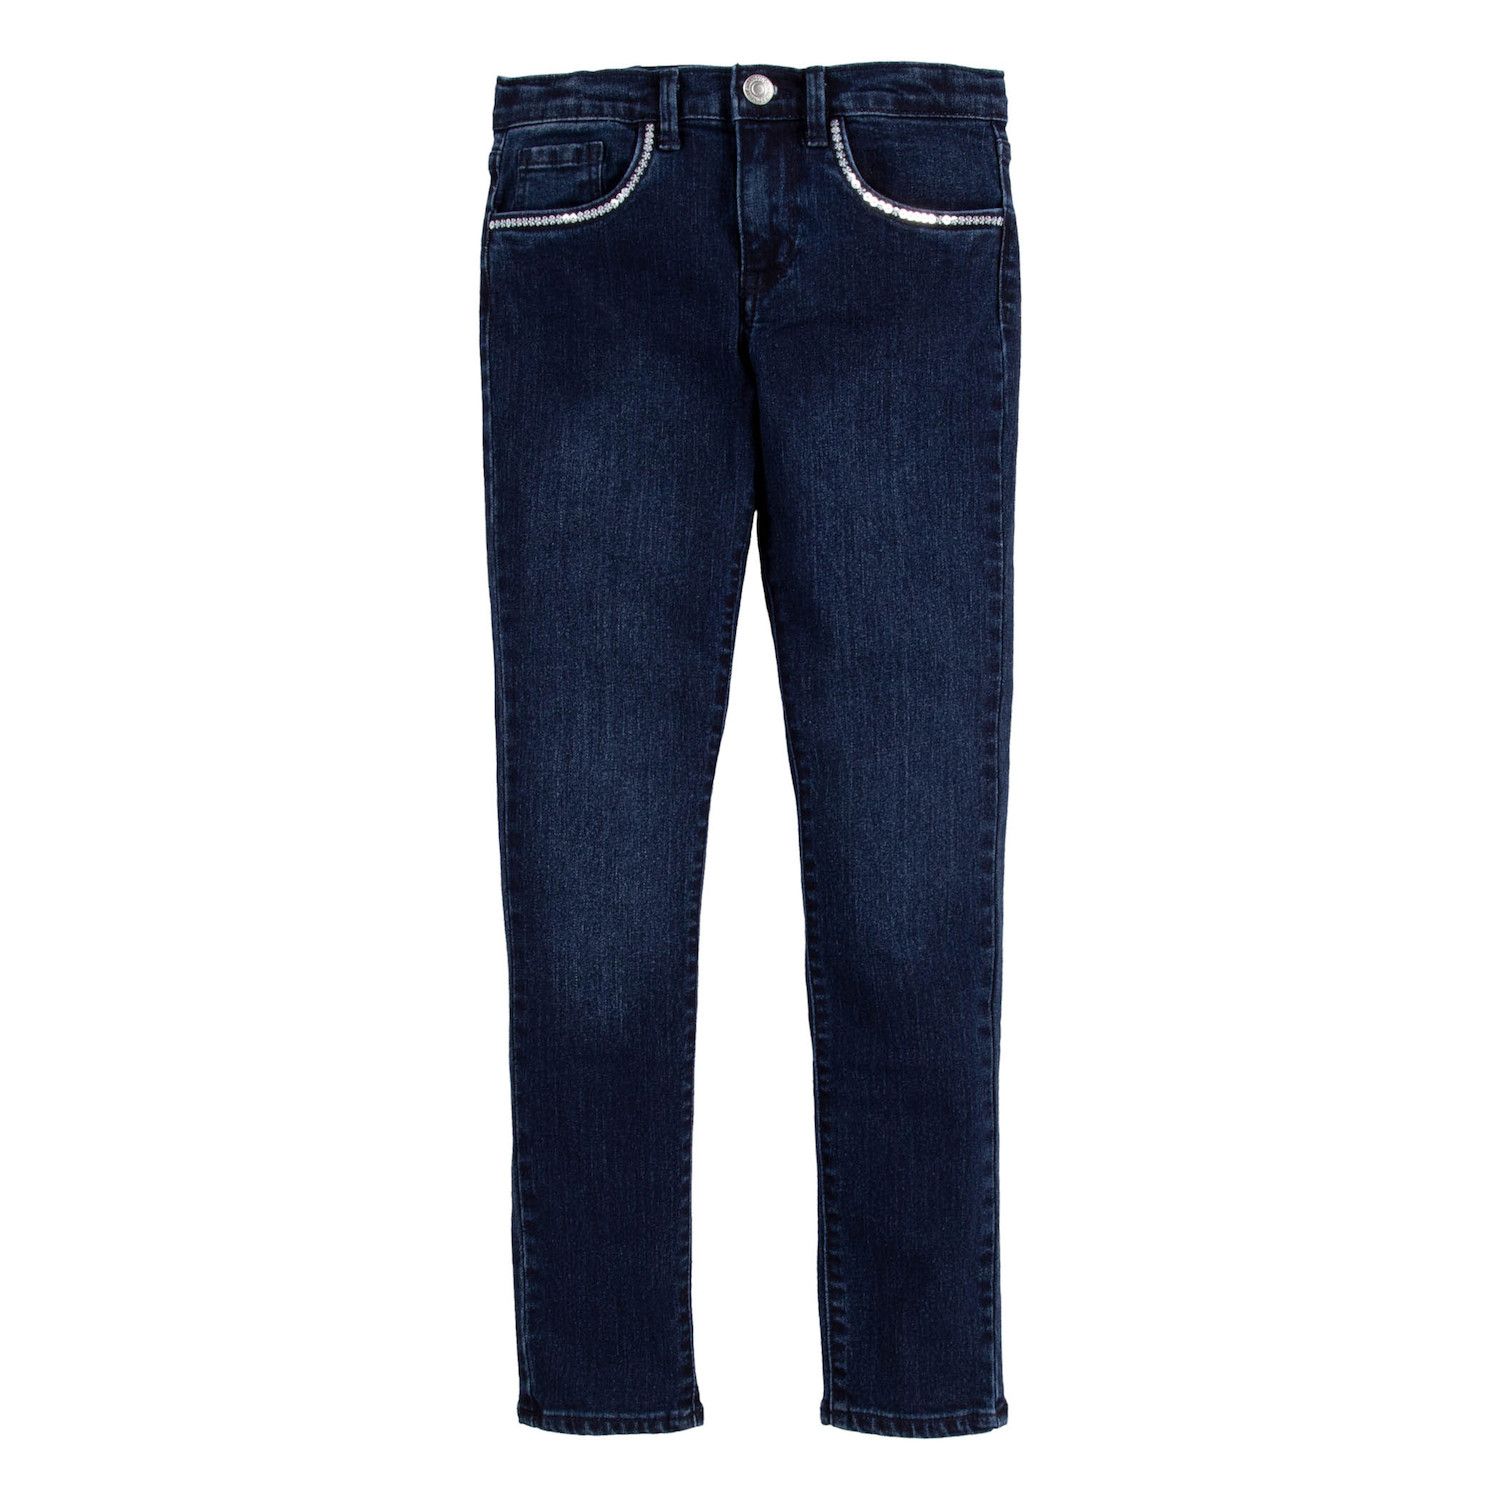 Image for Levi's Girls 7-16 710™ Super Skinny Fit Stretch Jeans at Kohl's.